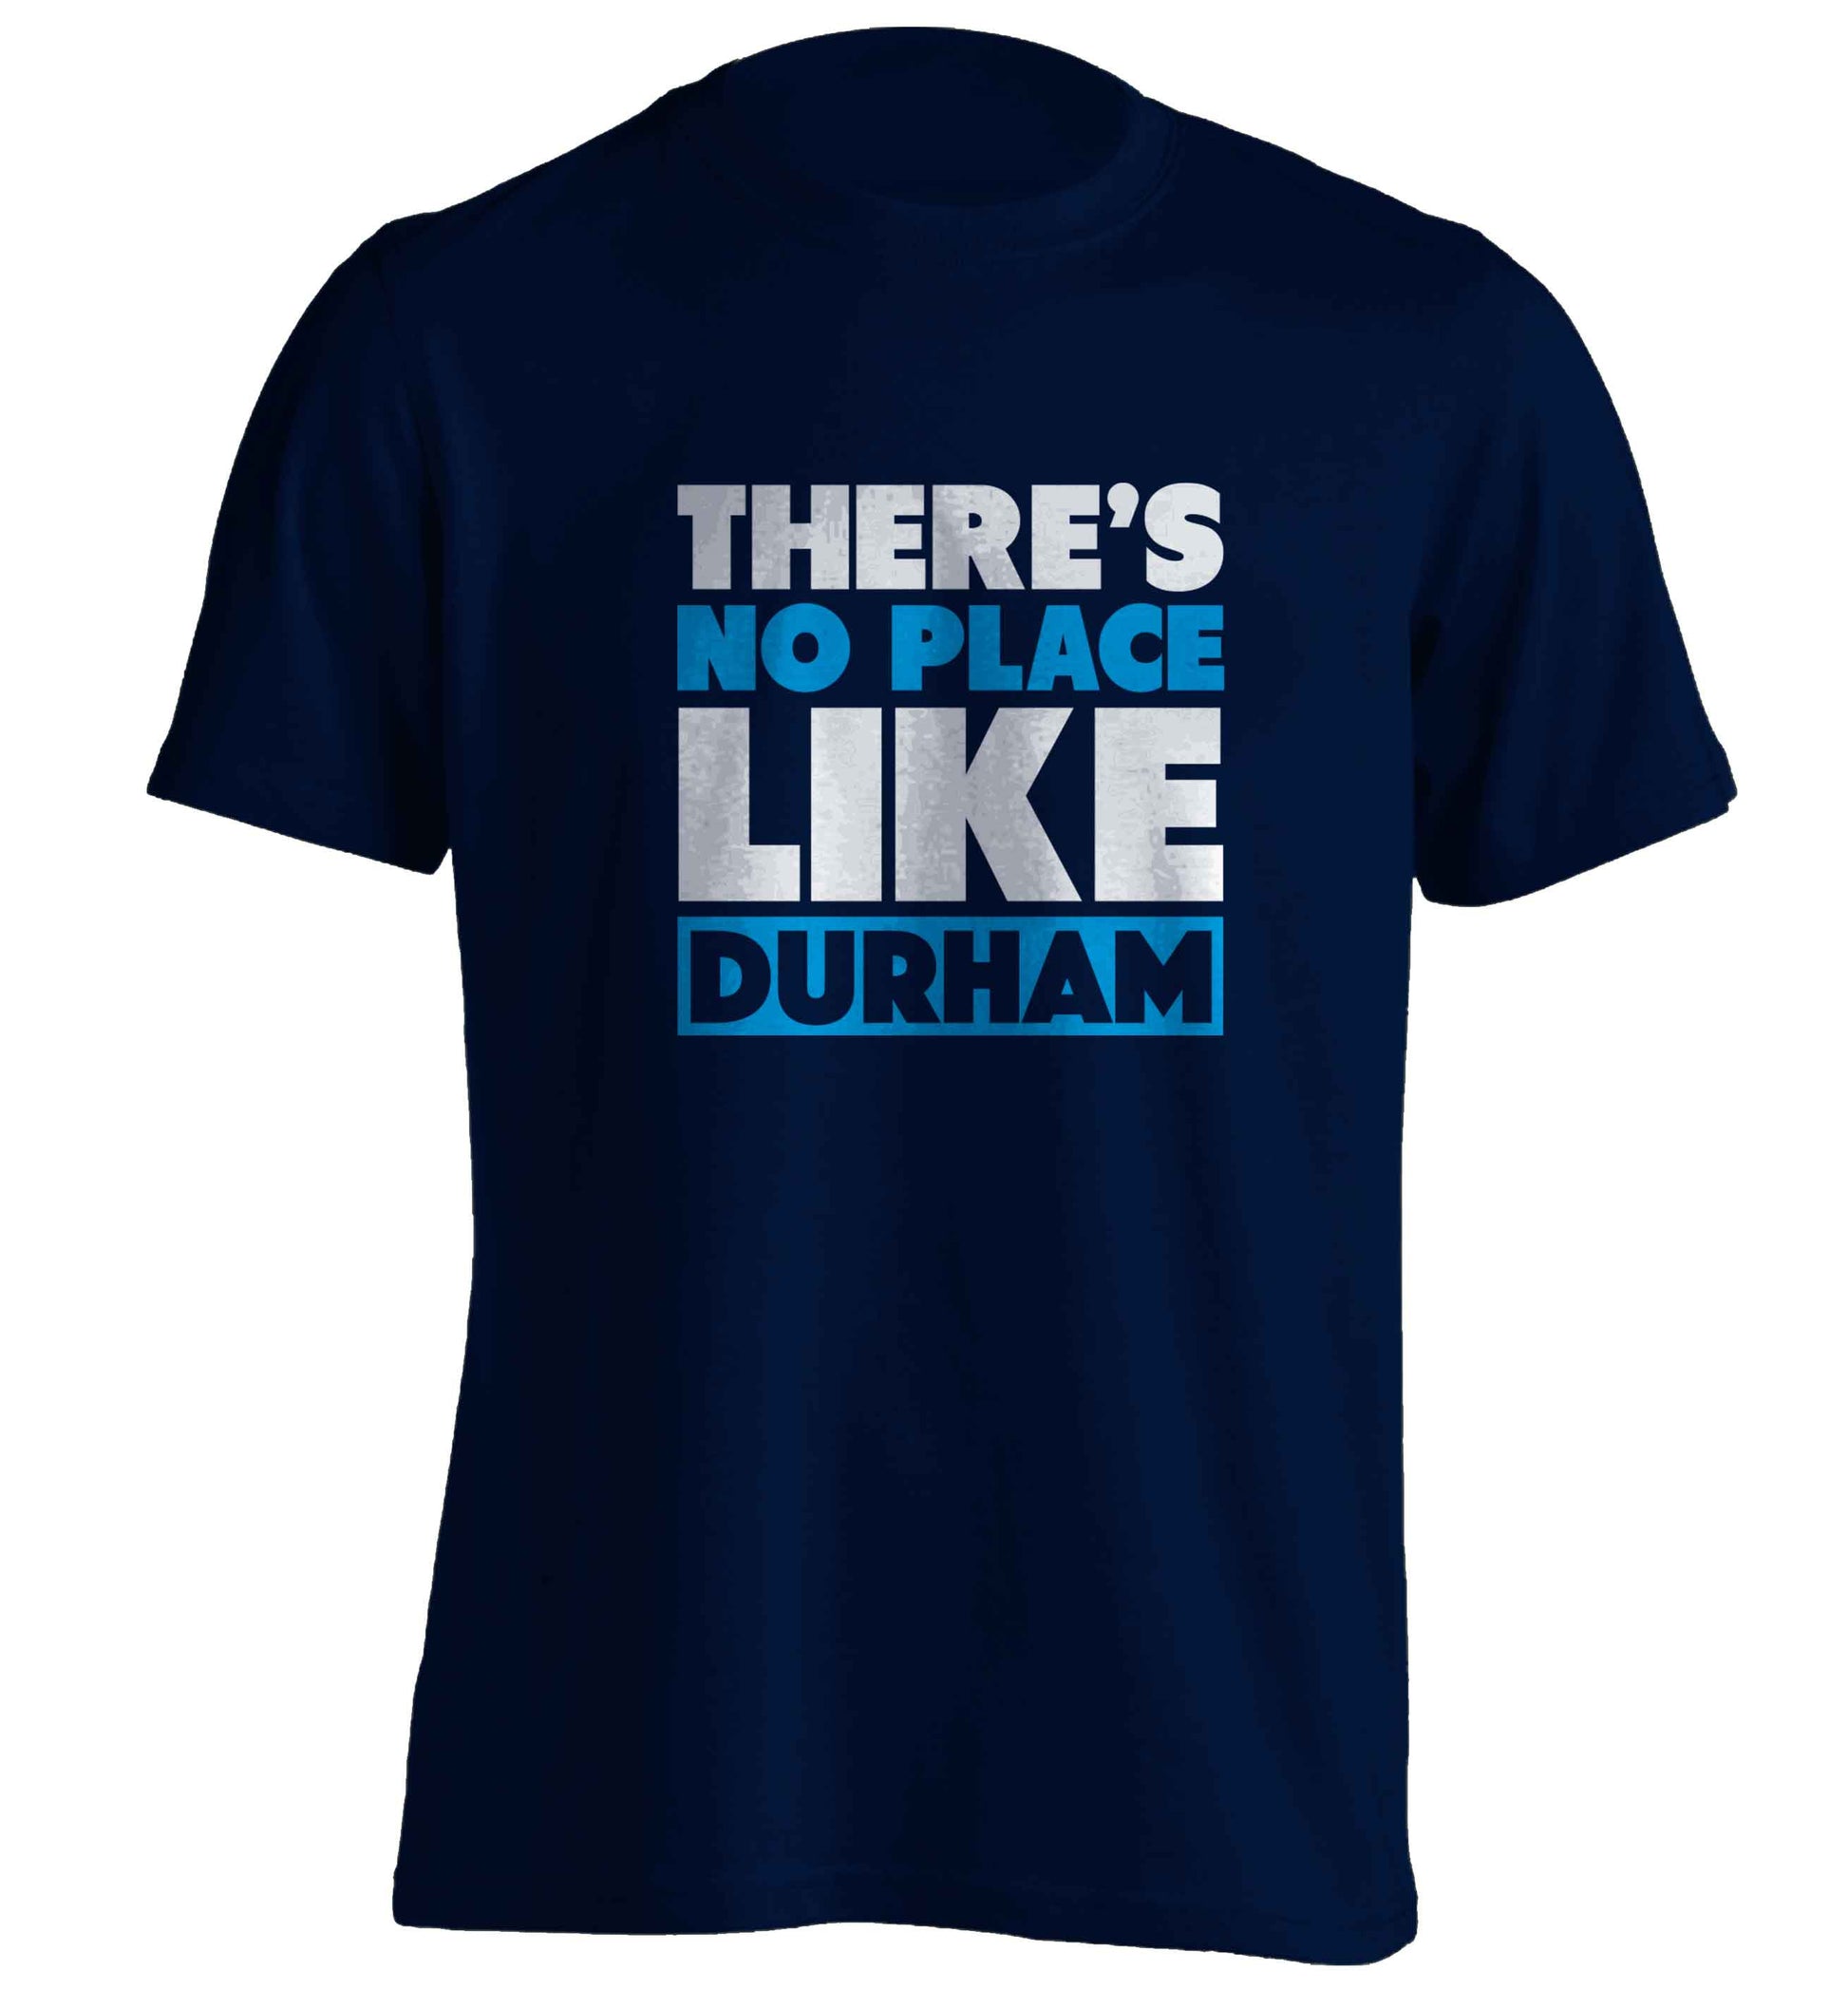 There's no place like Durham adults unisex navy Tshirt 2XL